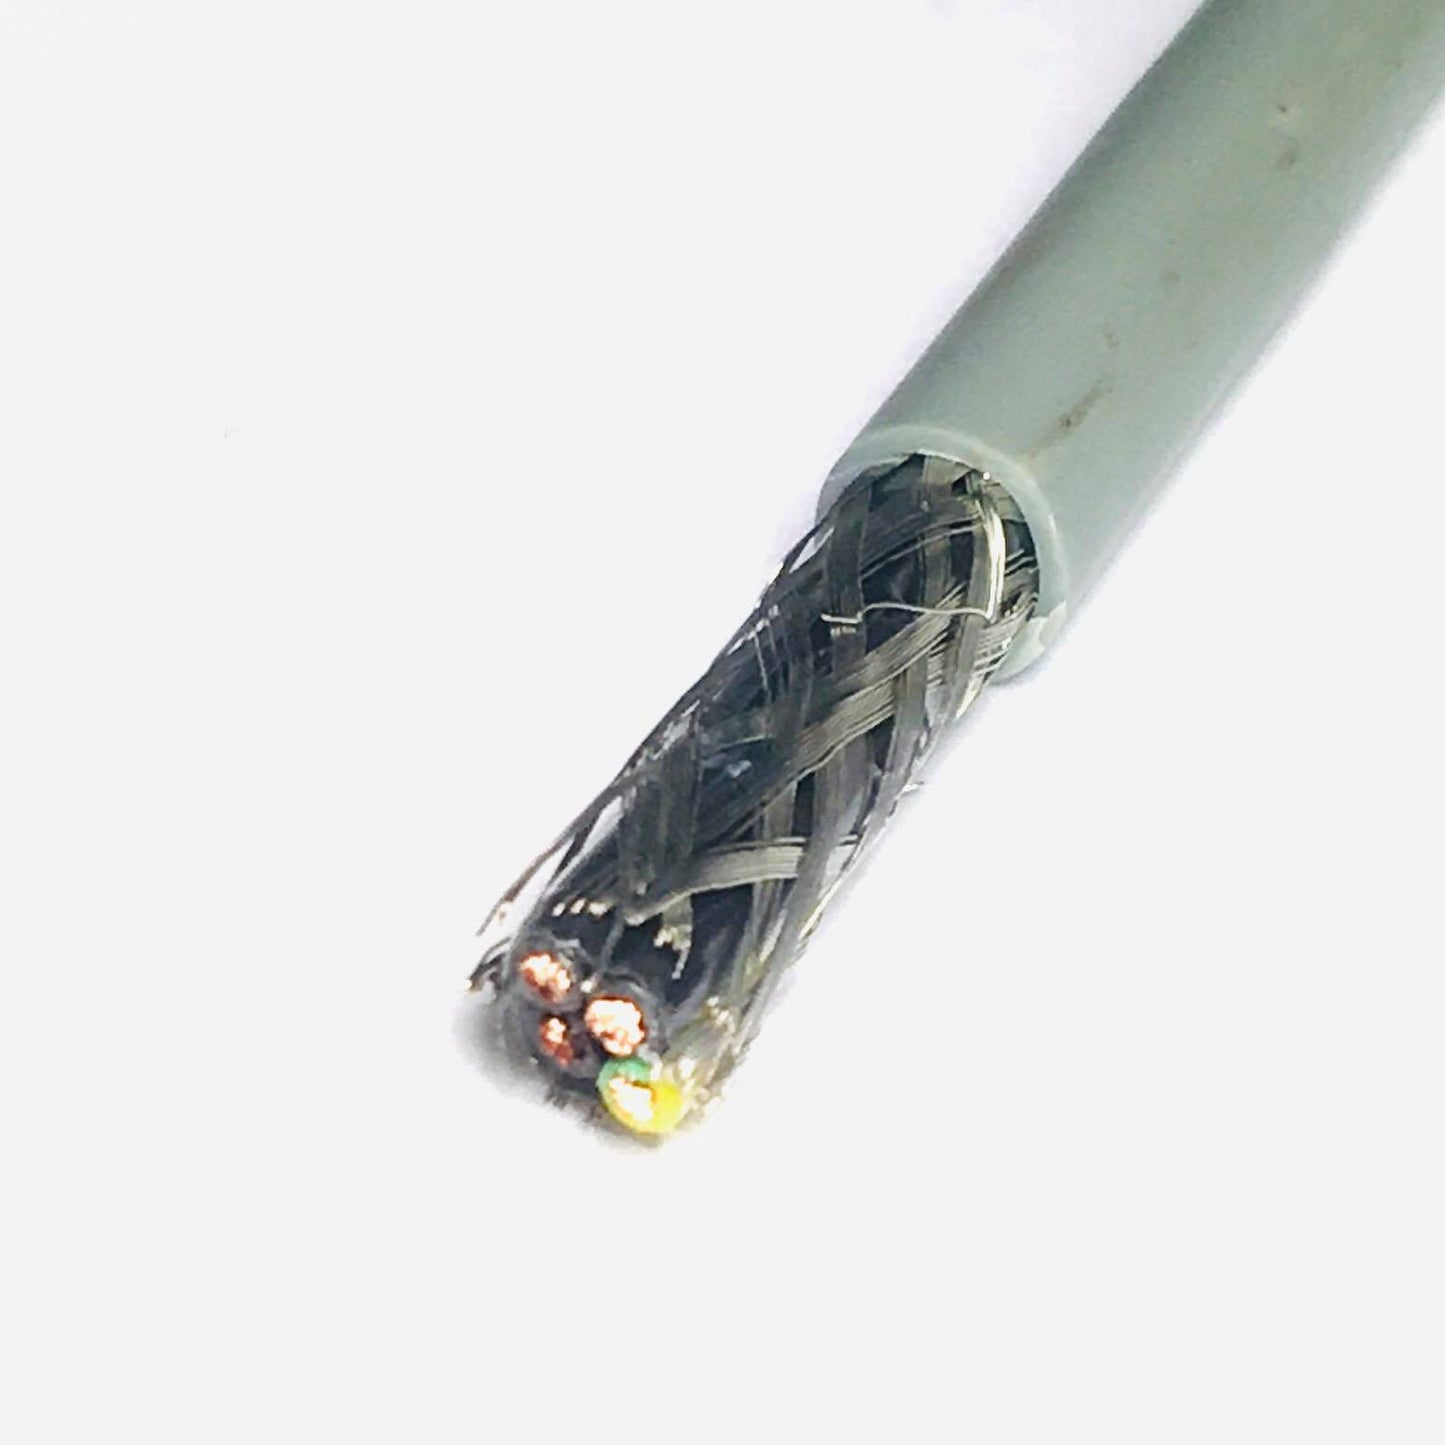 4 x 1.5mm CY SCREENED Cable